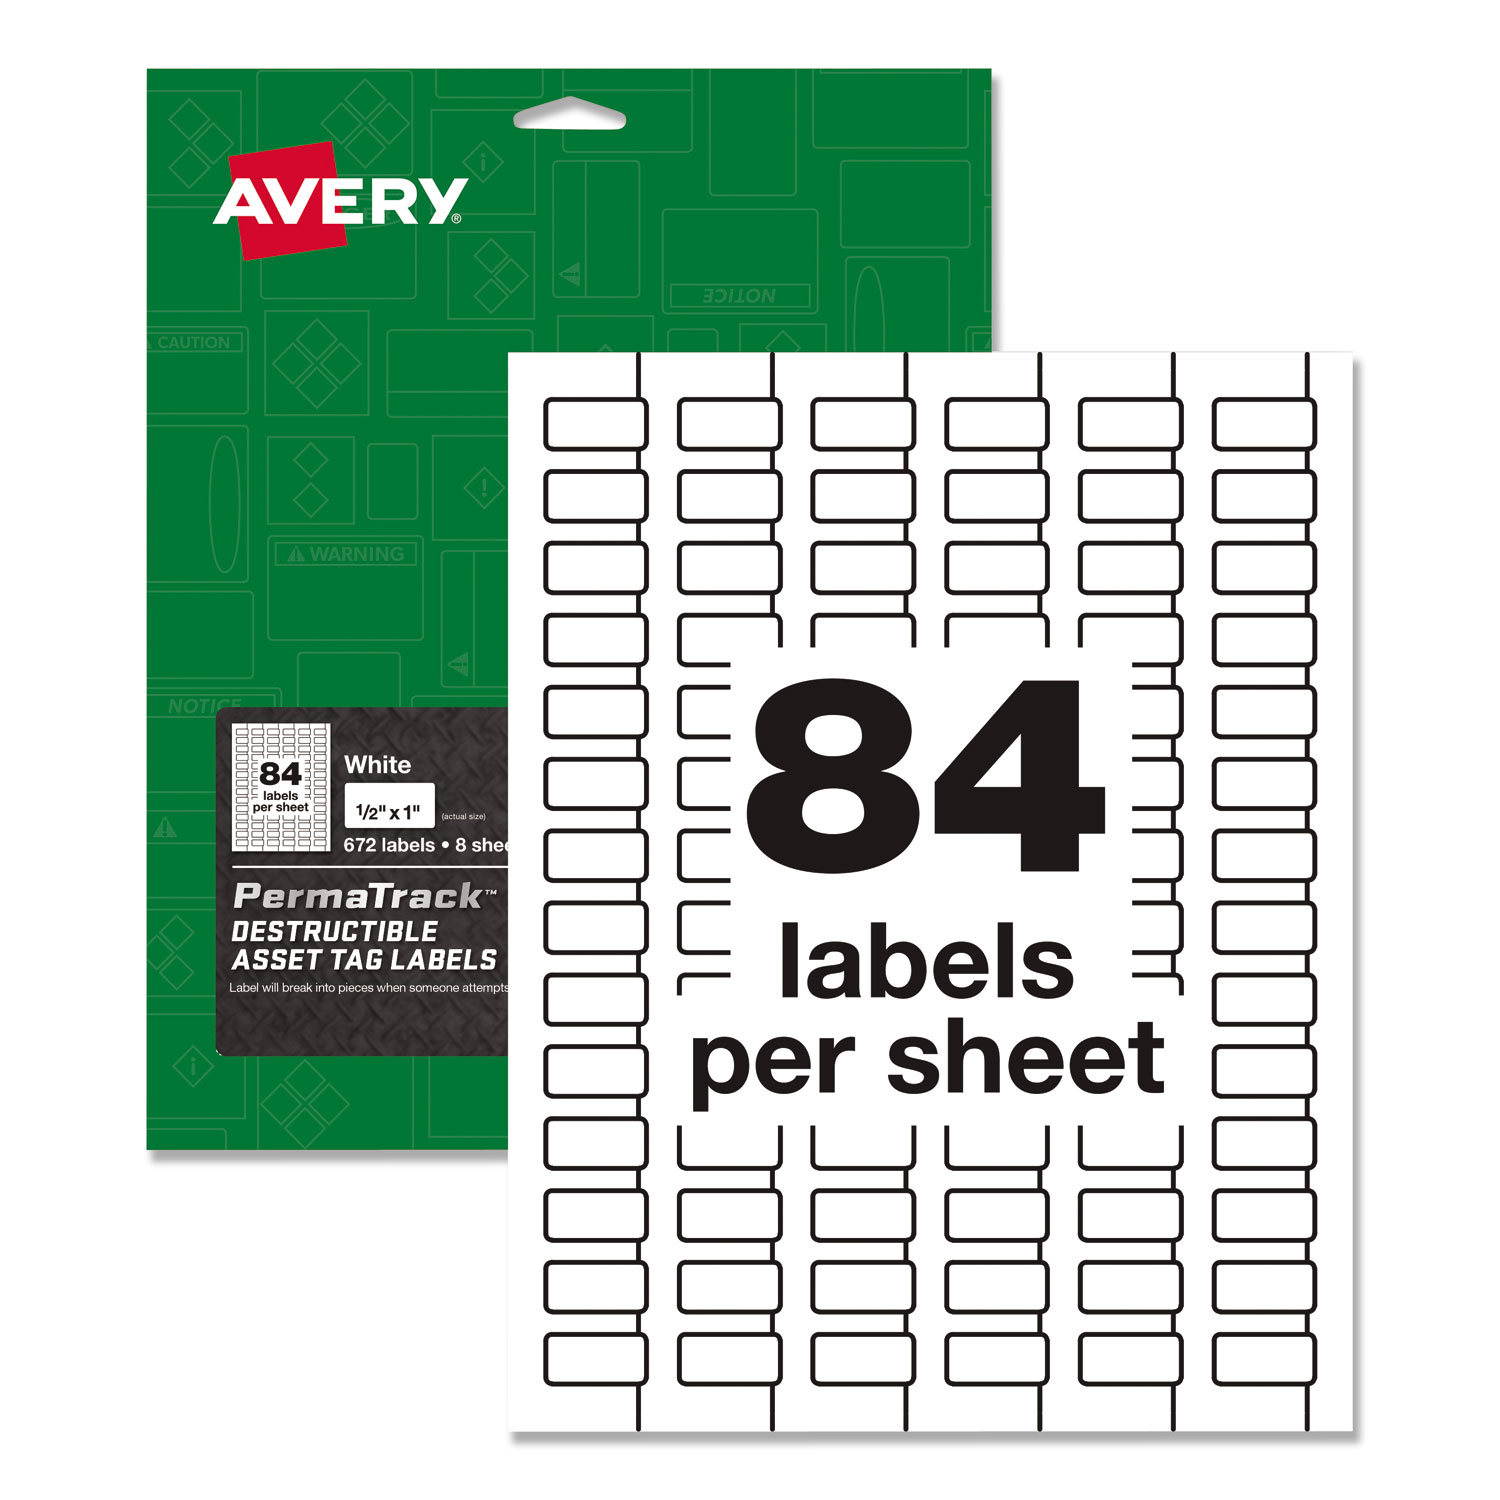  Avery 60535 PermaTrack Destructible Asset Tag Labels, Laser Printers, 0.5 x 1, White, 84/Sheet, 8 Sheets/Pack (AVE60535) 